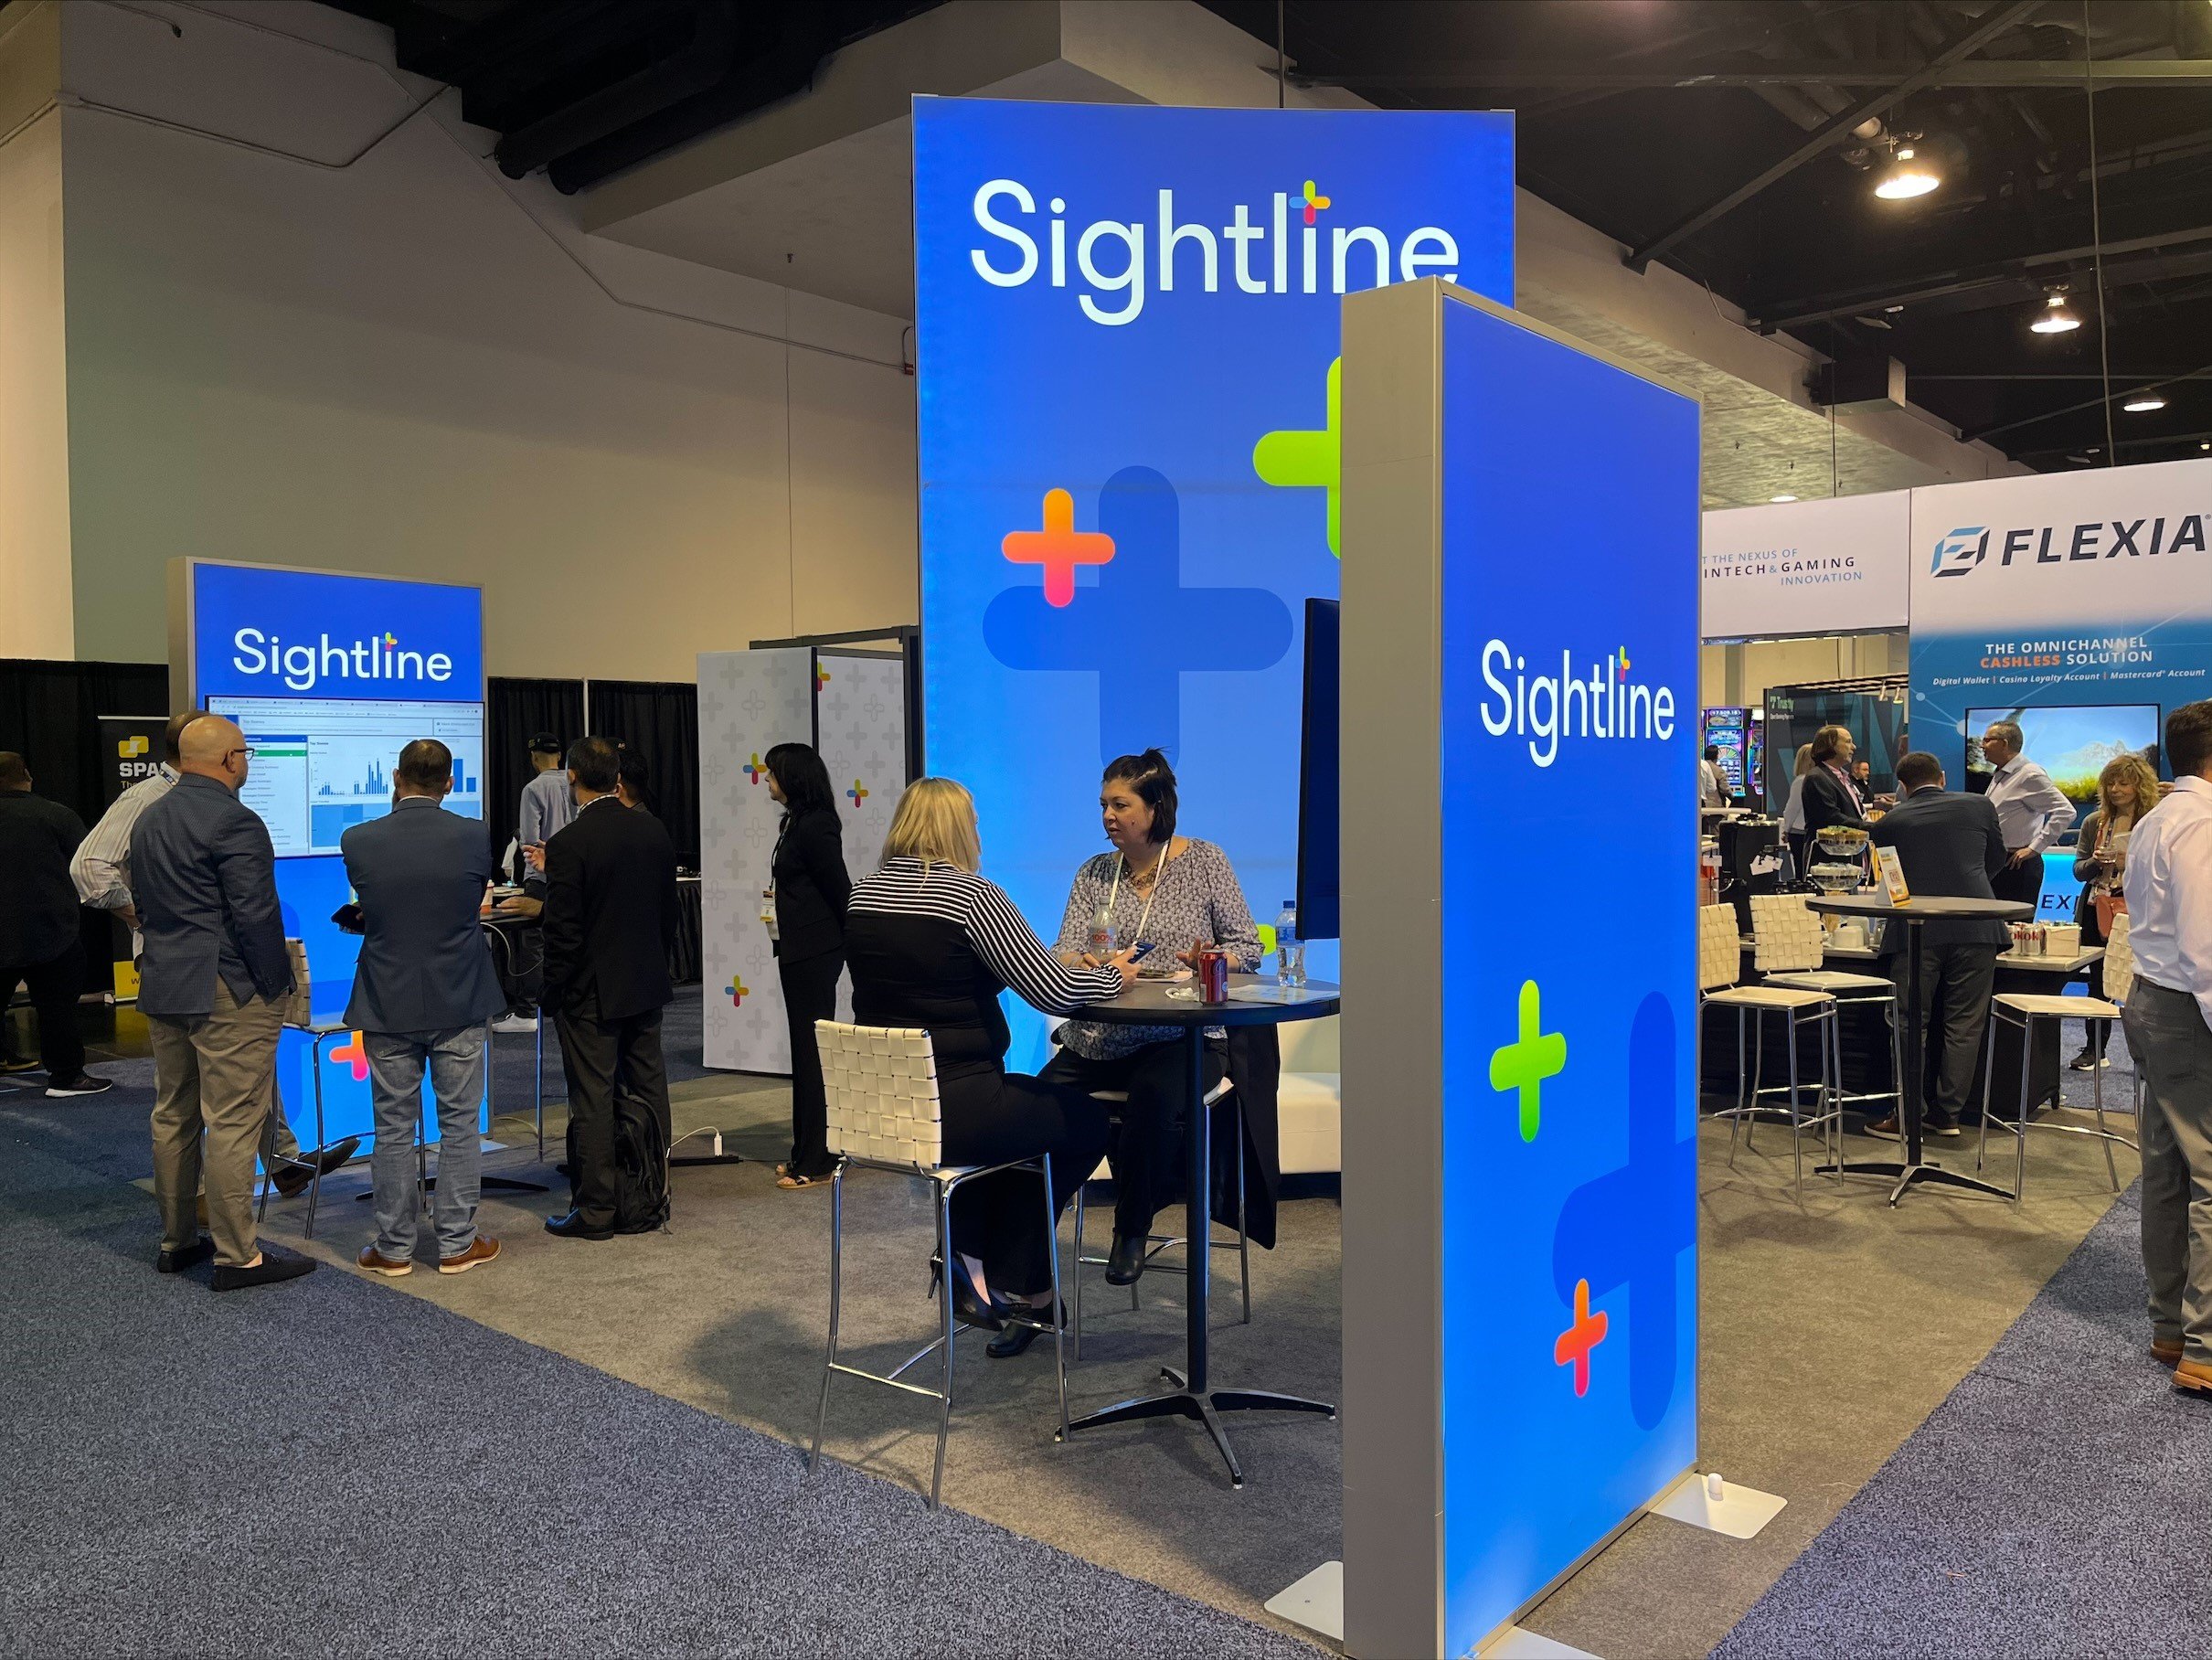 Sightline payments